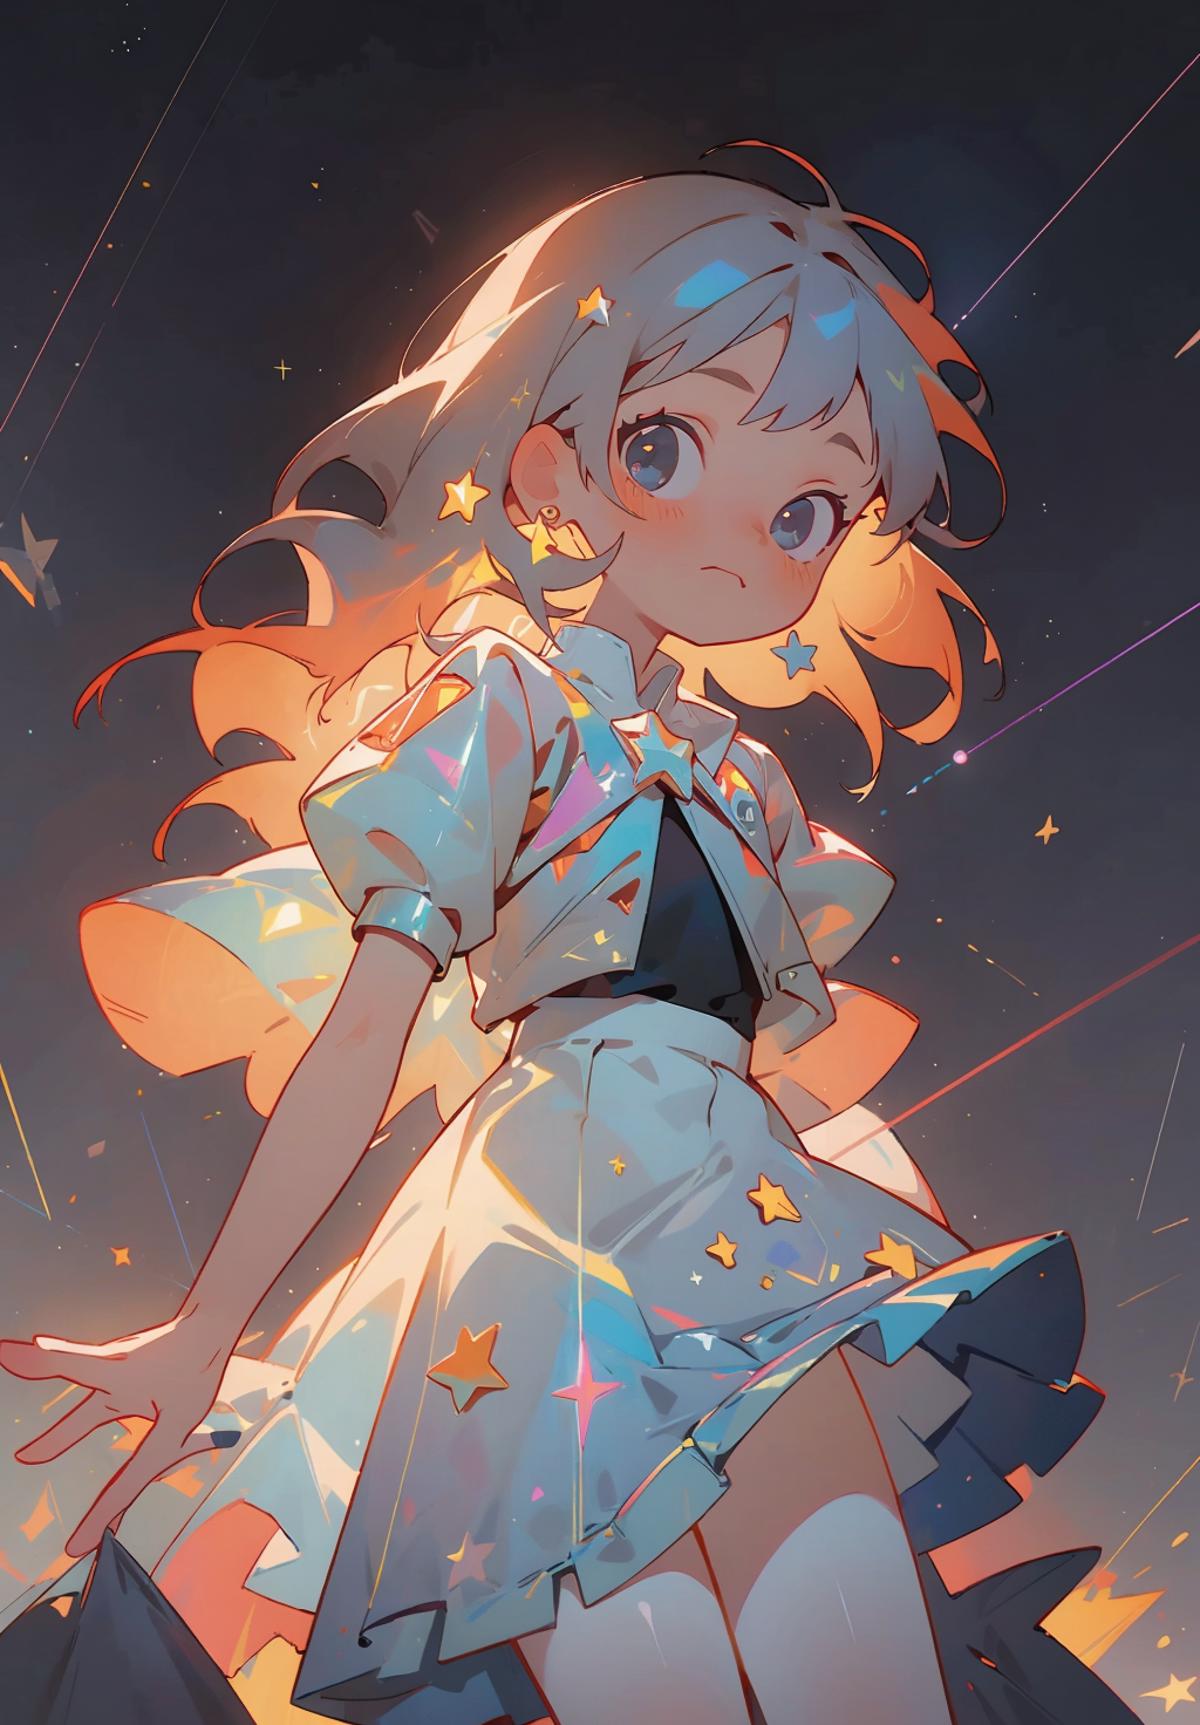 A young girl with stars on her dress is looking up at the sky.